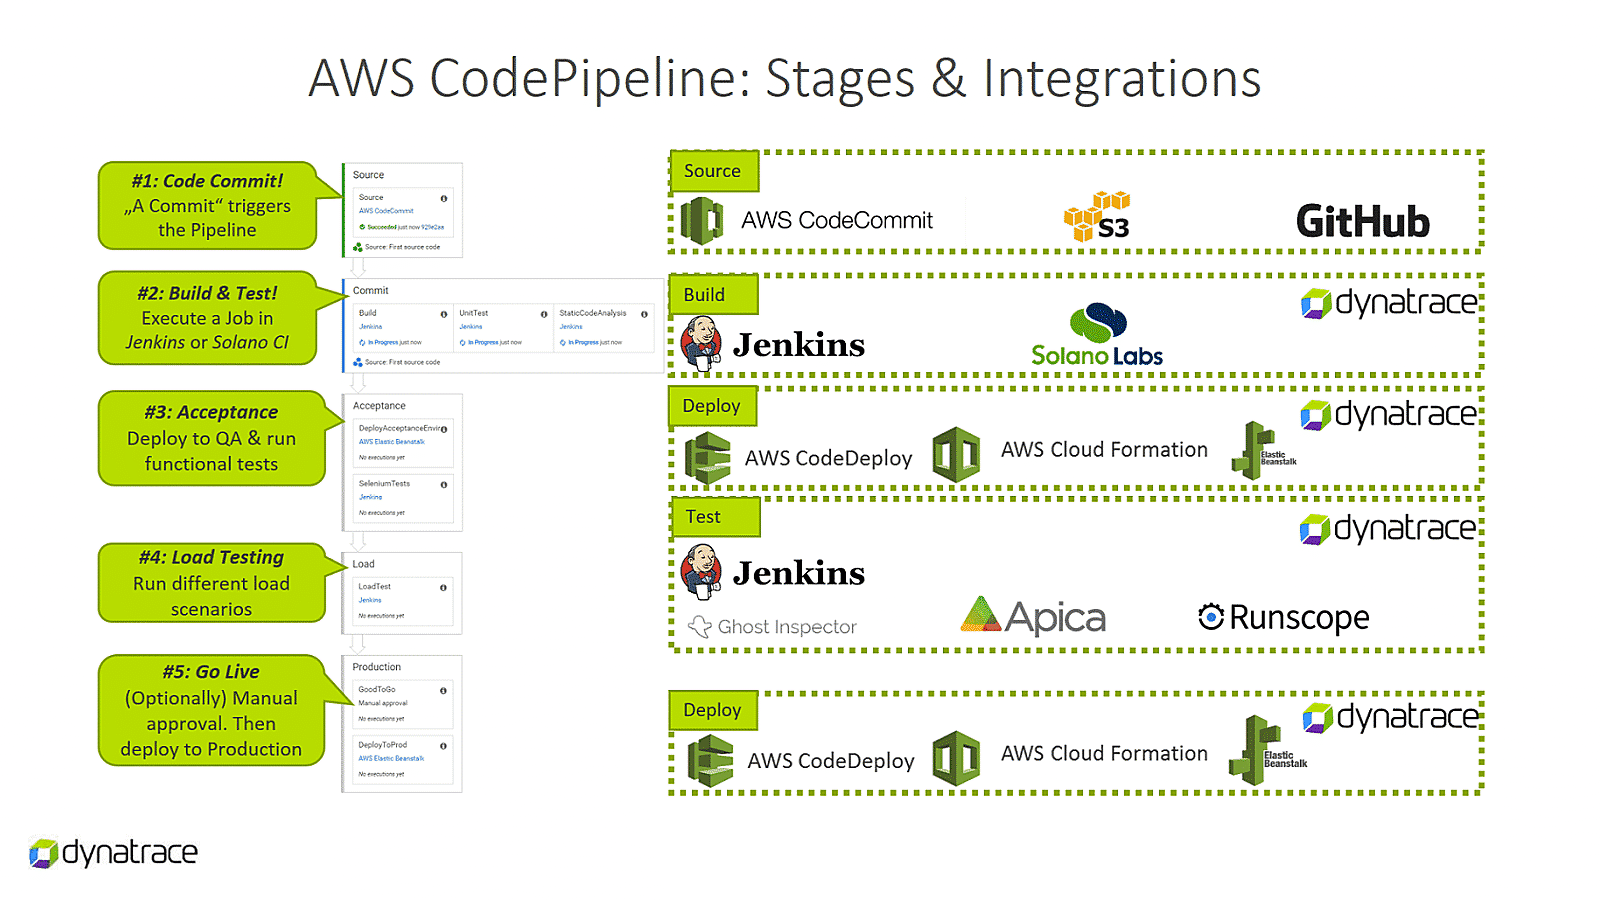 AWS CodePipeline stages and integrations with Dynatrace